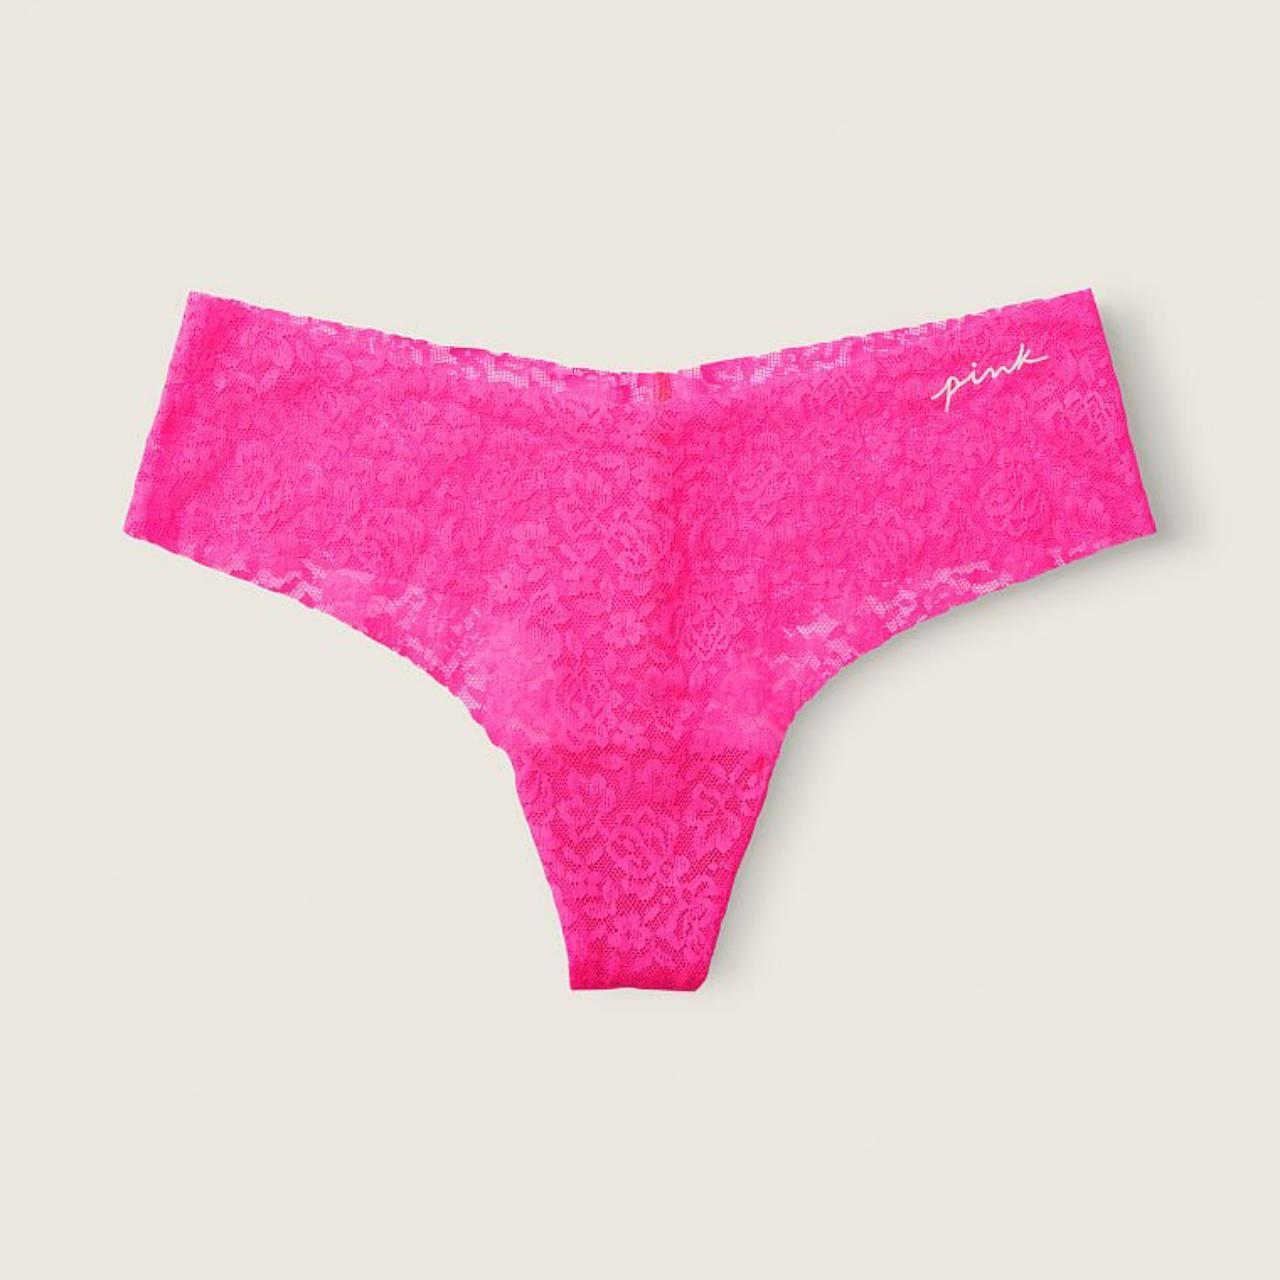 Victoria's Secret PINK - 2 for $30 PINK Period Panties sold out! 😱 It's  ok, more are coming mid-May, exclusively online! Don't miss out, pre-order  now at vspink.com!